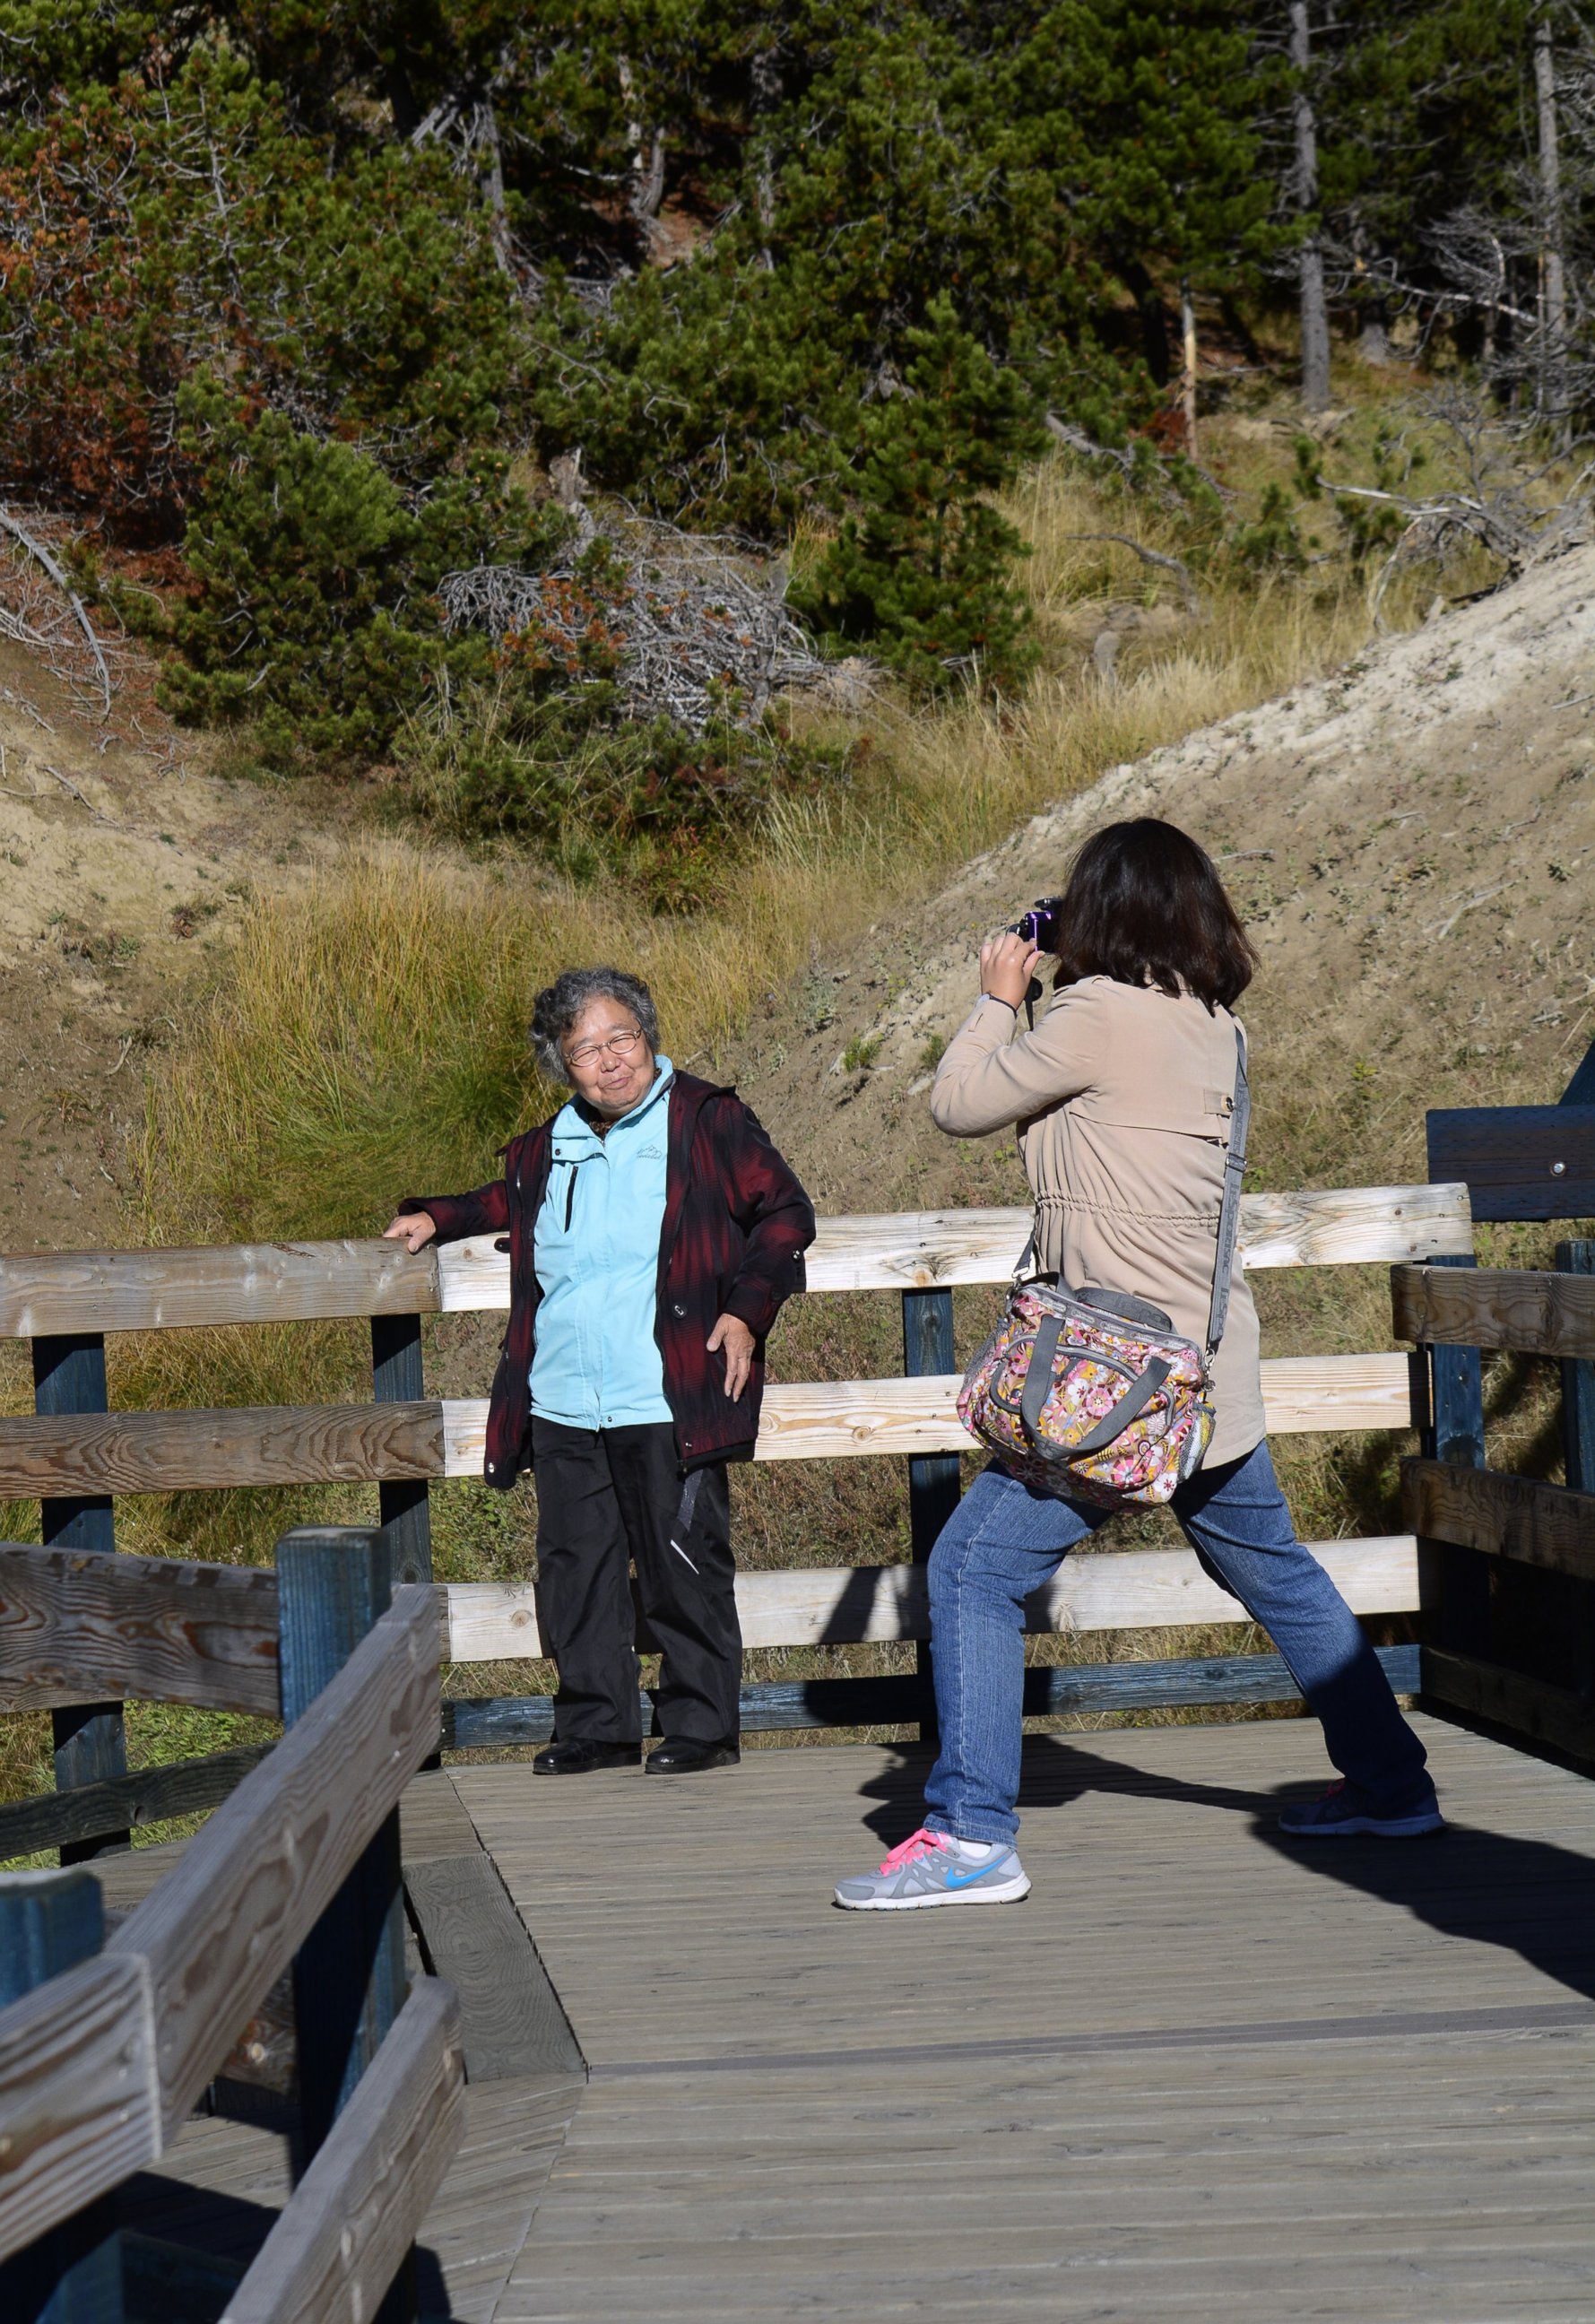 PHOTO: Tourists from China take souvenir photographs on a boardwalk leading to Dragon's Mount Spring, a popular geothermal attraction in Yellowstone National Park in Wyoming on Sept. 25, 2014. 